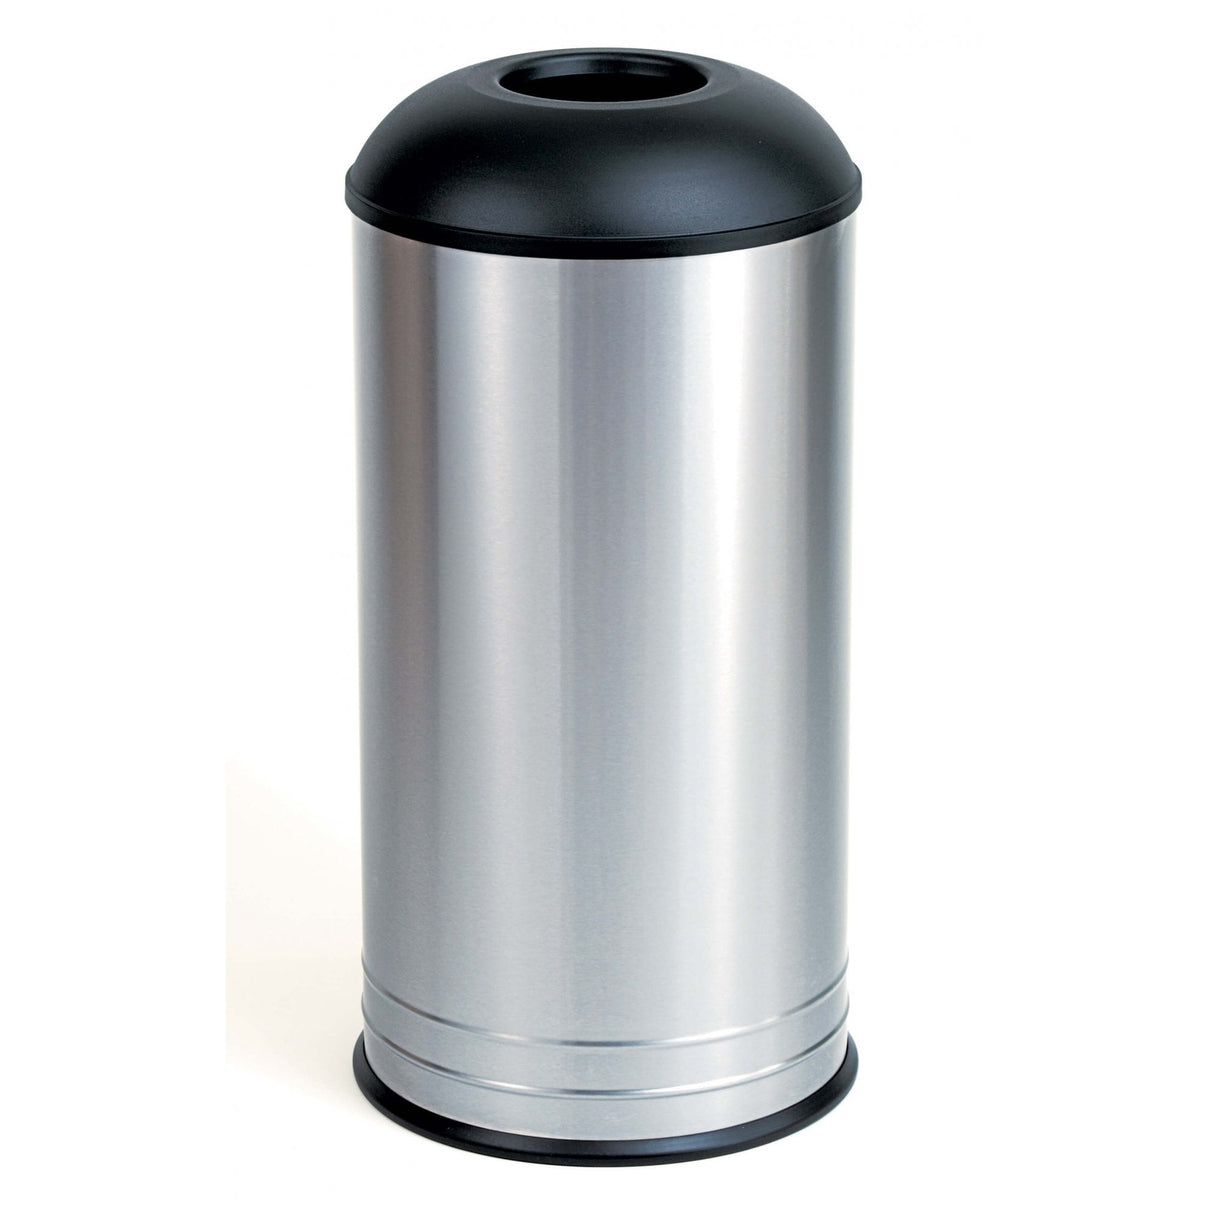 B-2300 Waste Bin with Half-Open Dome Lid